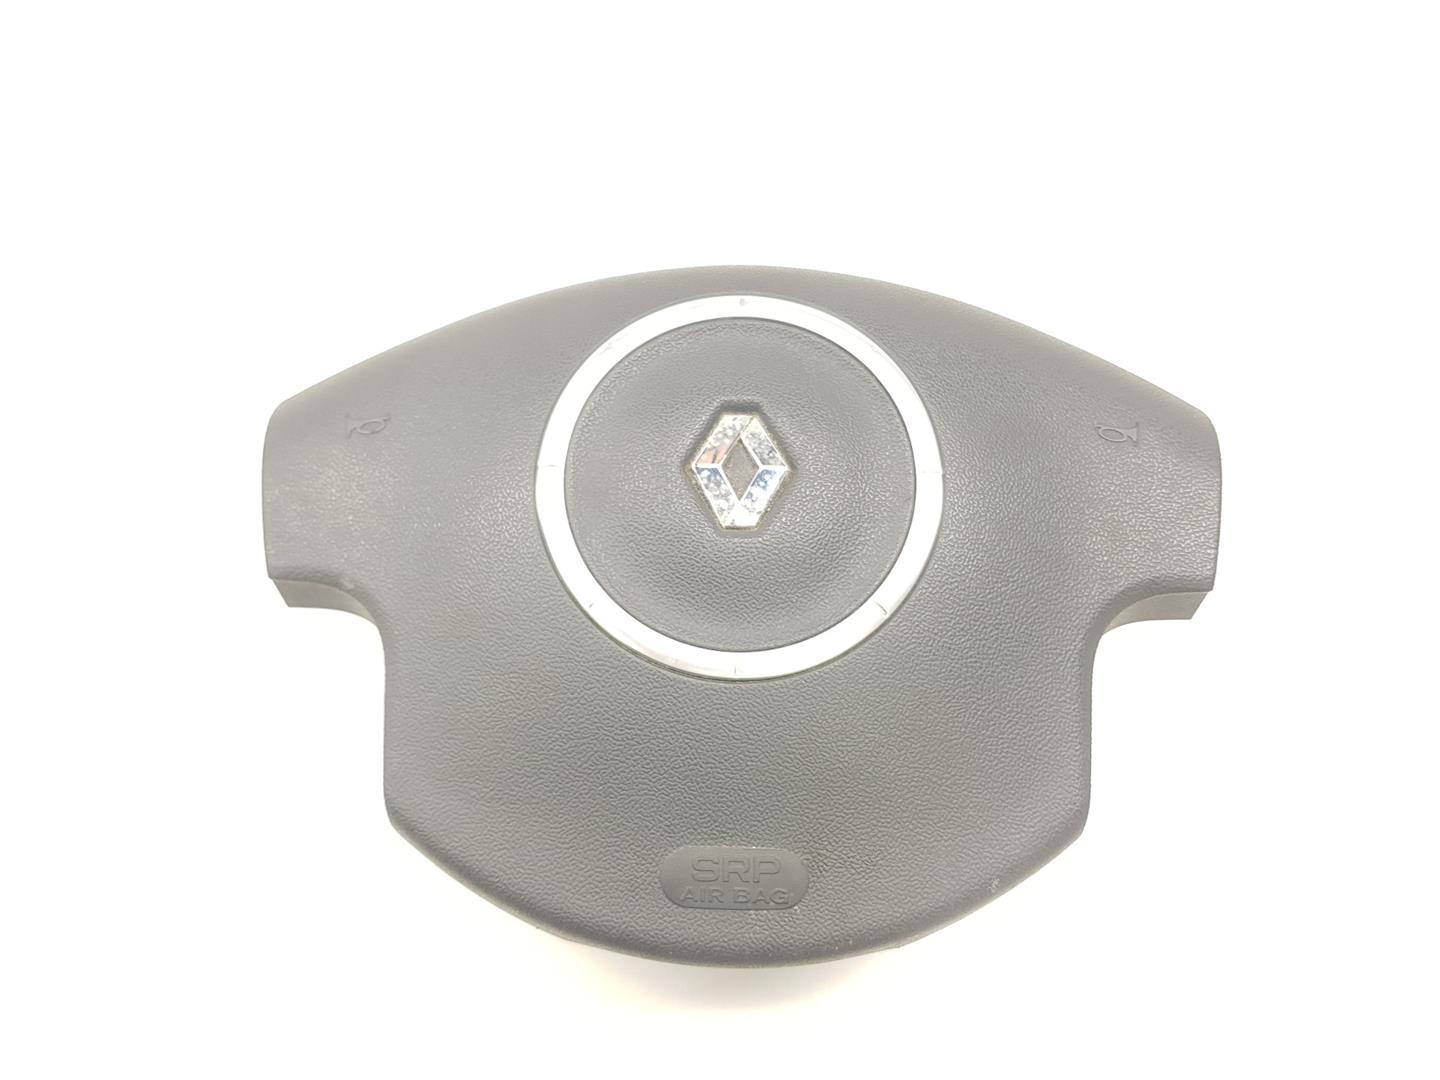 RENAULT Scenic 2 generation (2003-2010) Other Control Units 8200485099, 8200485099 21476300